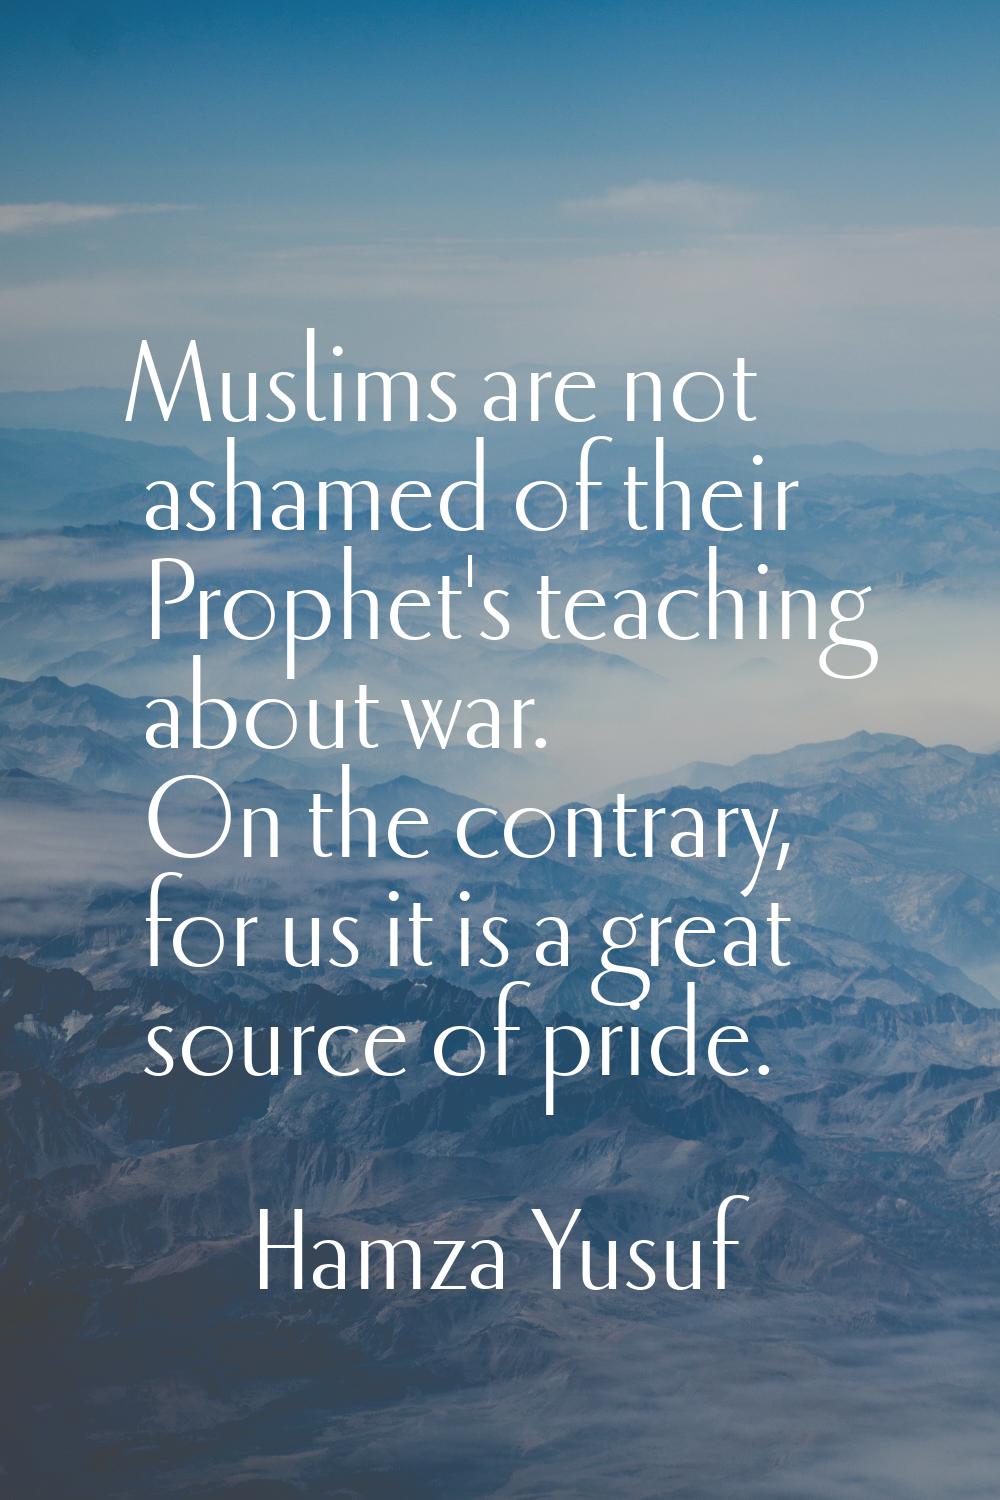 Muslims are not ashamed of their Prophet's teaching about war. On the contrary, for us it is a grea